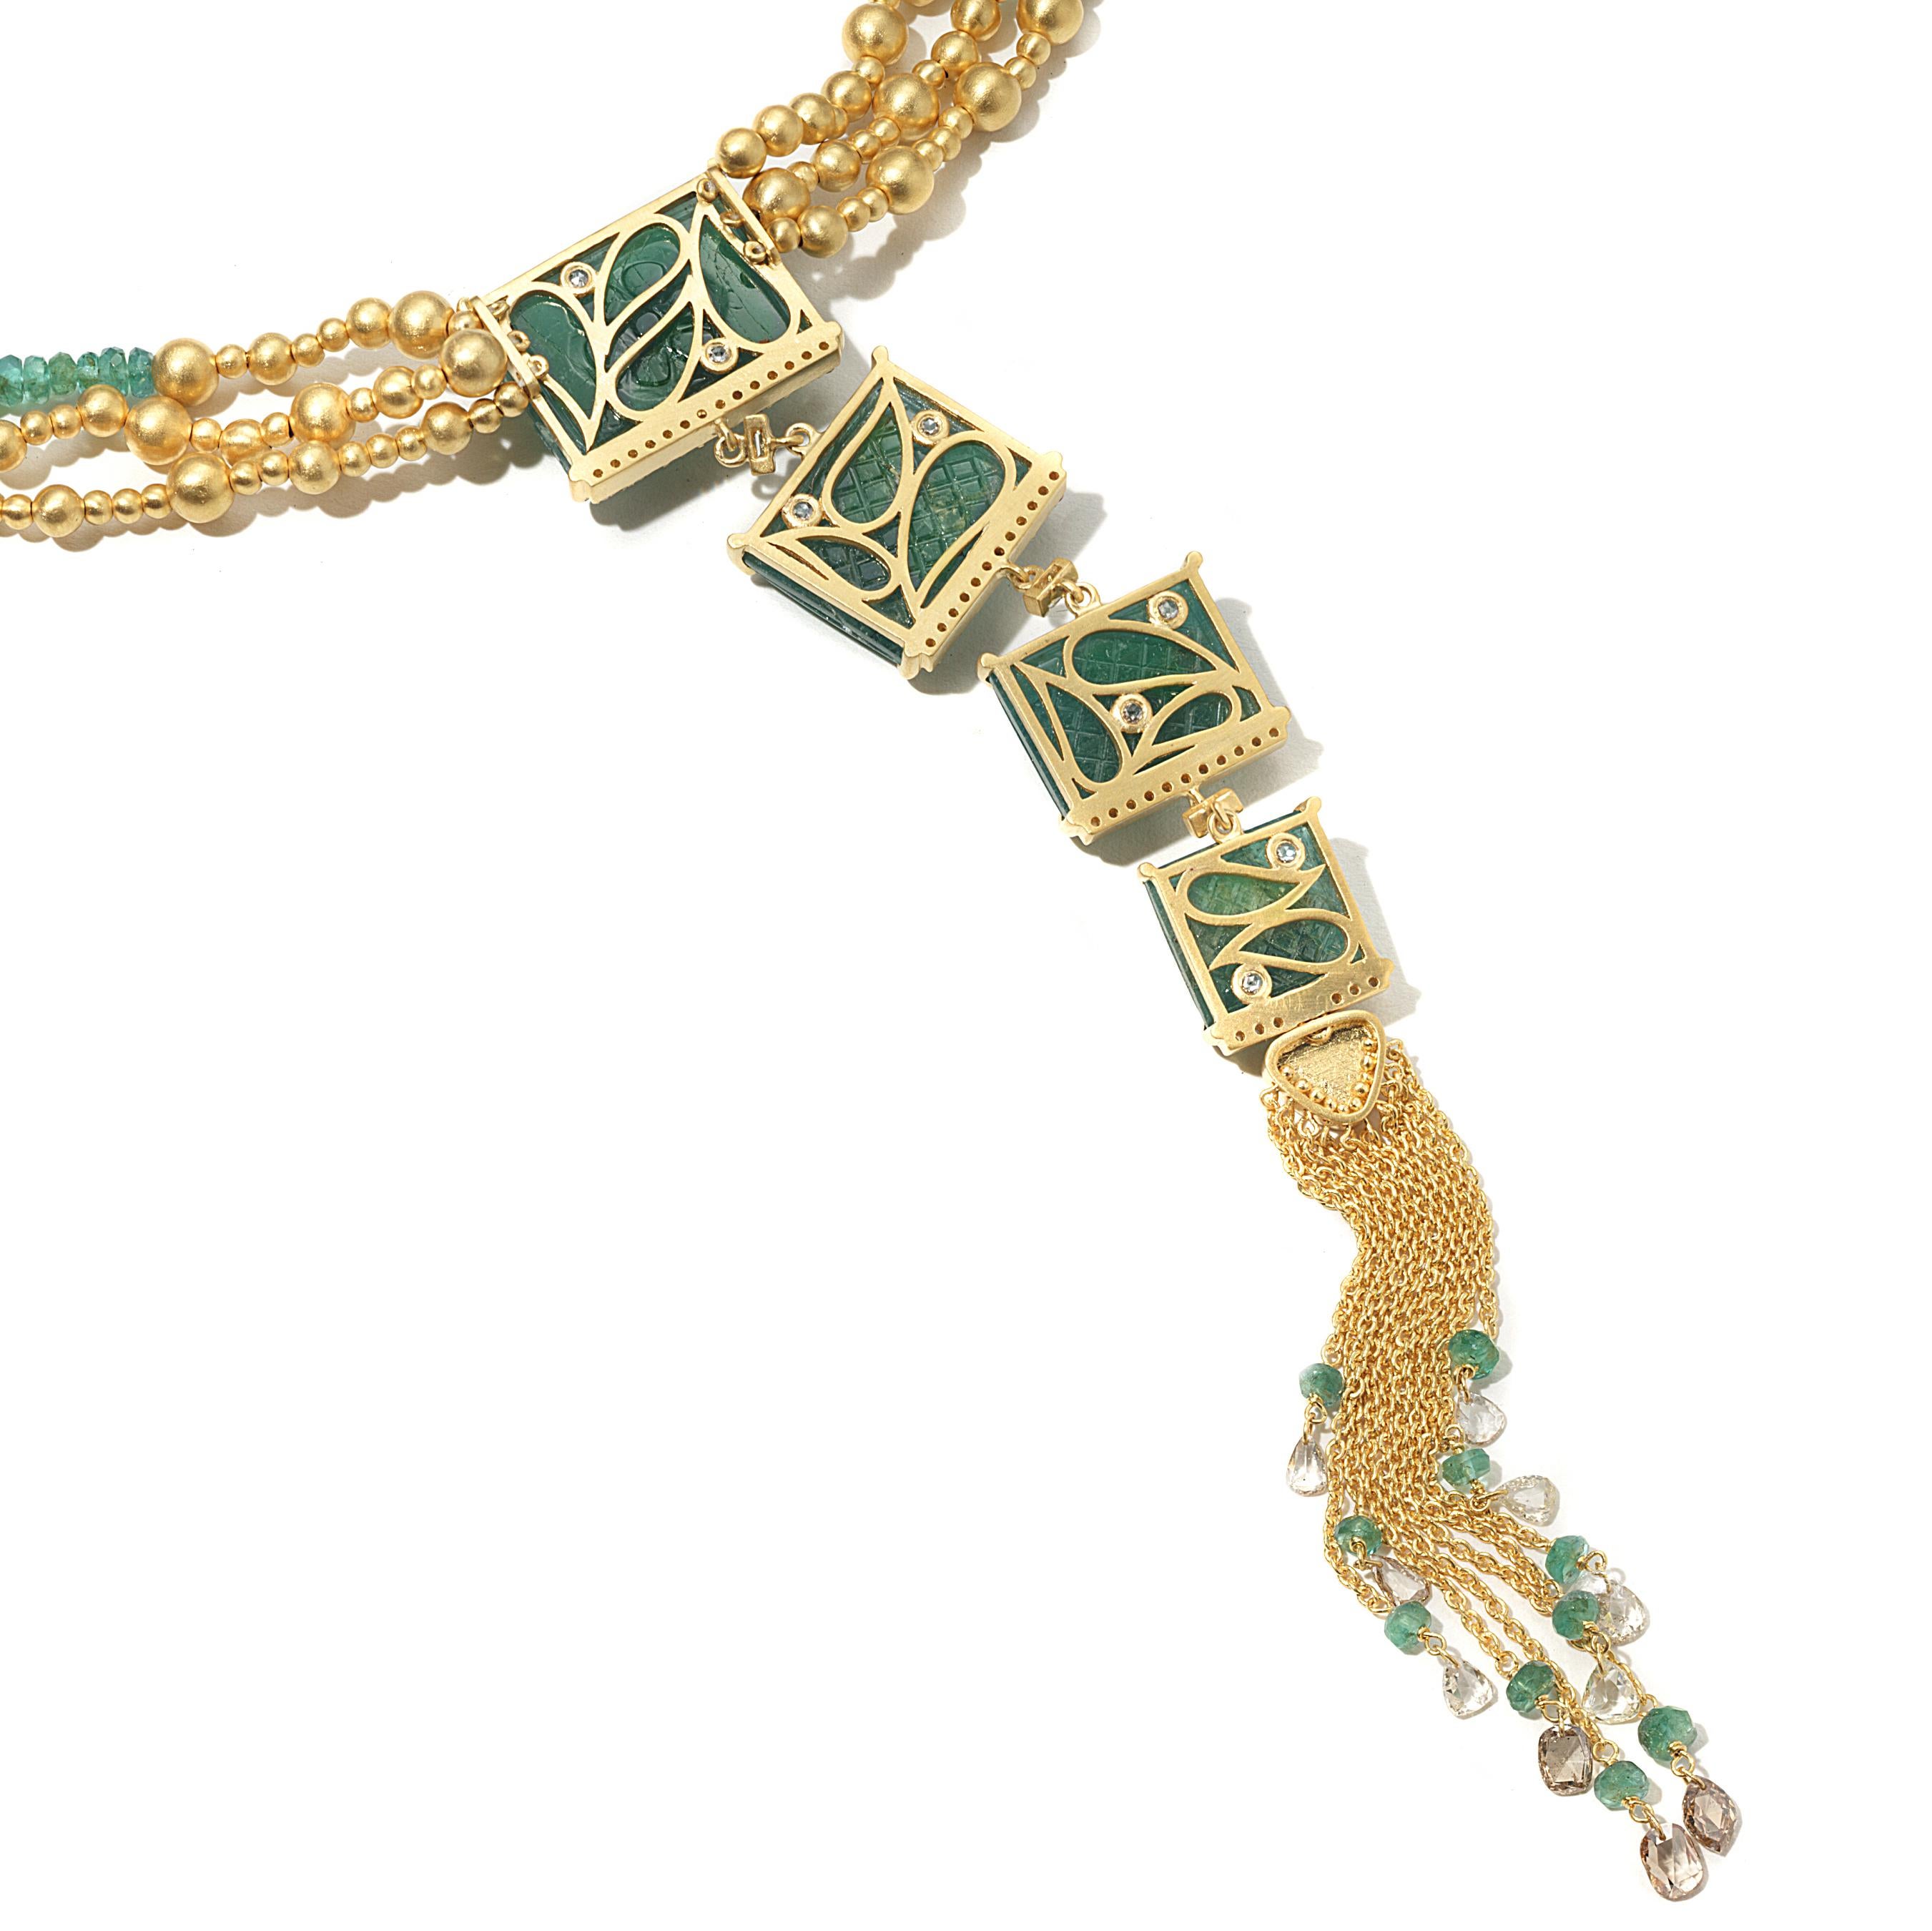 Affinity Drop Necklace with 121.83CTS of Carved and Beaded Emeralds, and 2.01CTS of Diamonds. Set in 20K Yellow Gold.